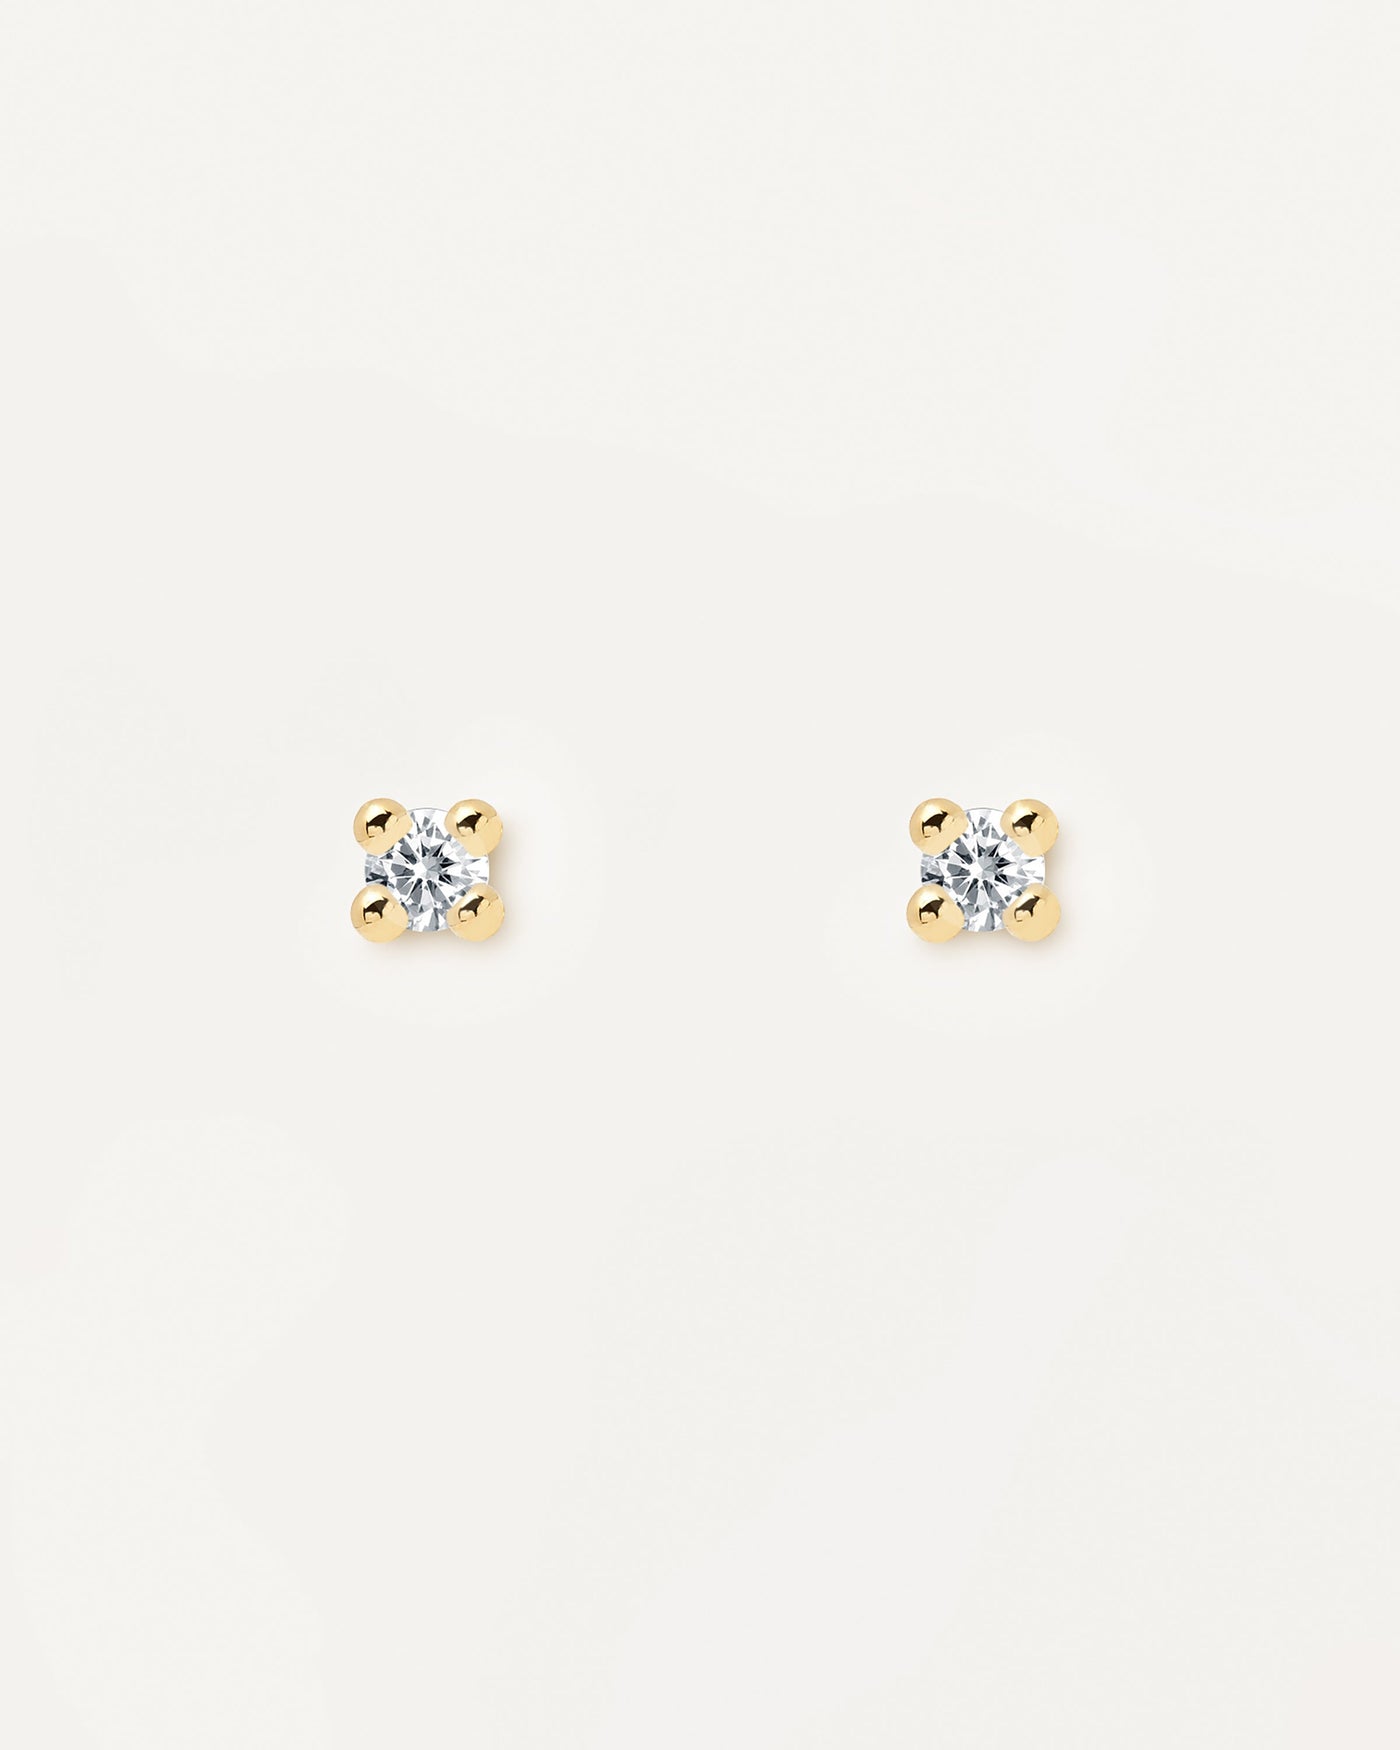 2023 Selection | Essentia Earrings. Pair of 18k gold plated silver stud earrings set with a white zirconia stone. Get the latest arrival from PDPAOLA. Place your order safely and get this Best Seller. Free Shipping.